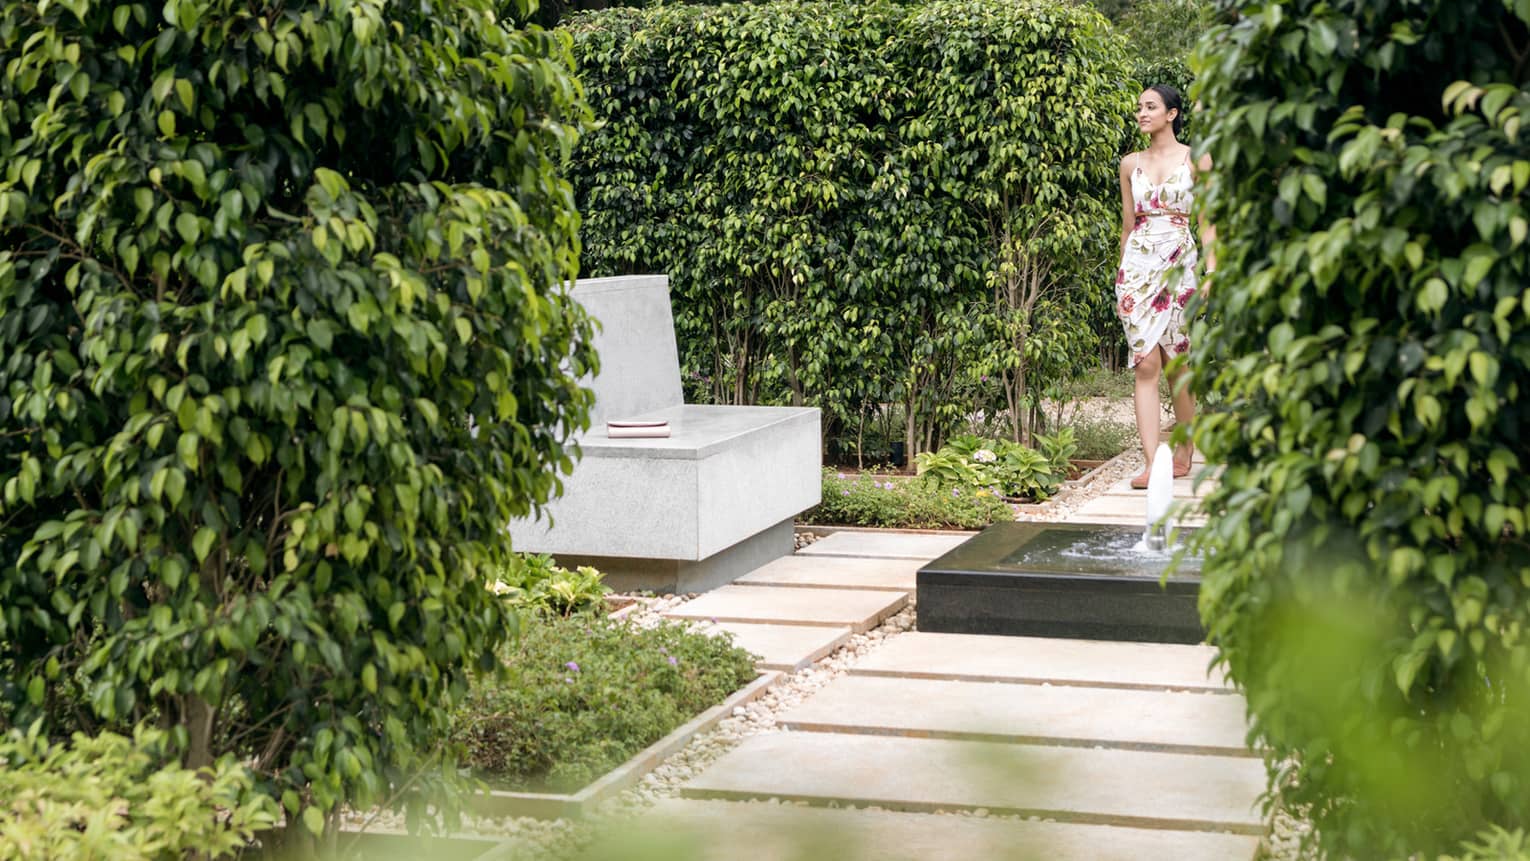 Woman walks along stone path with small fountain in garden